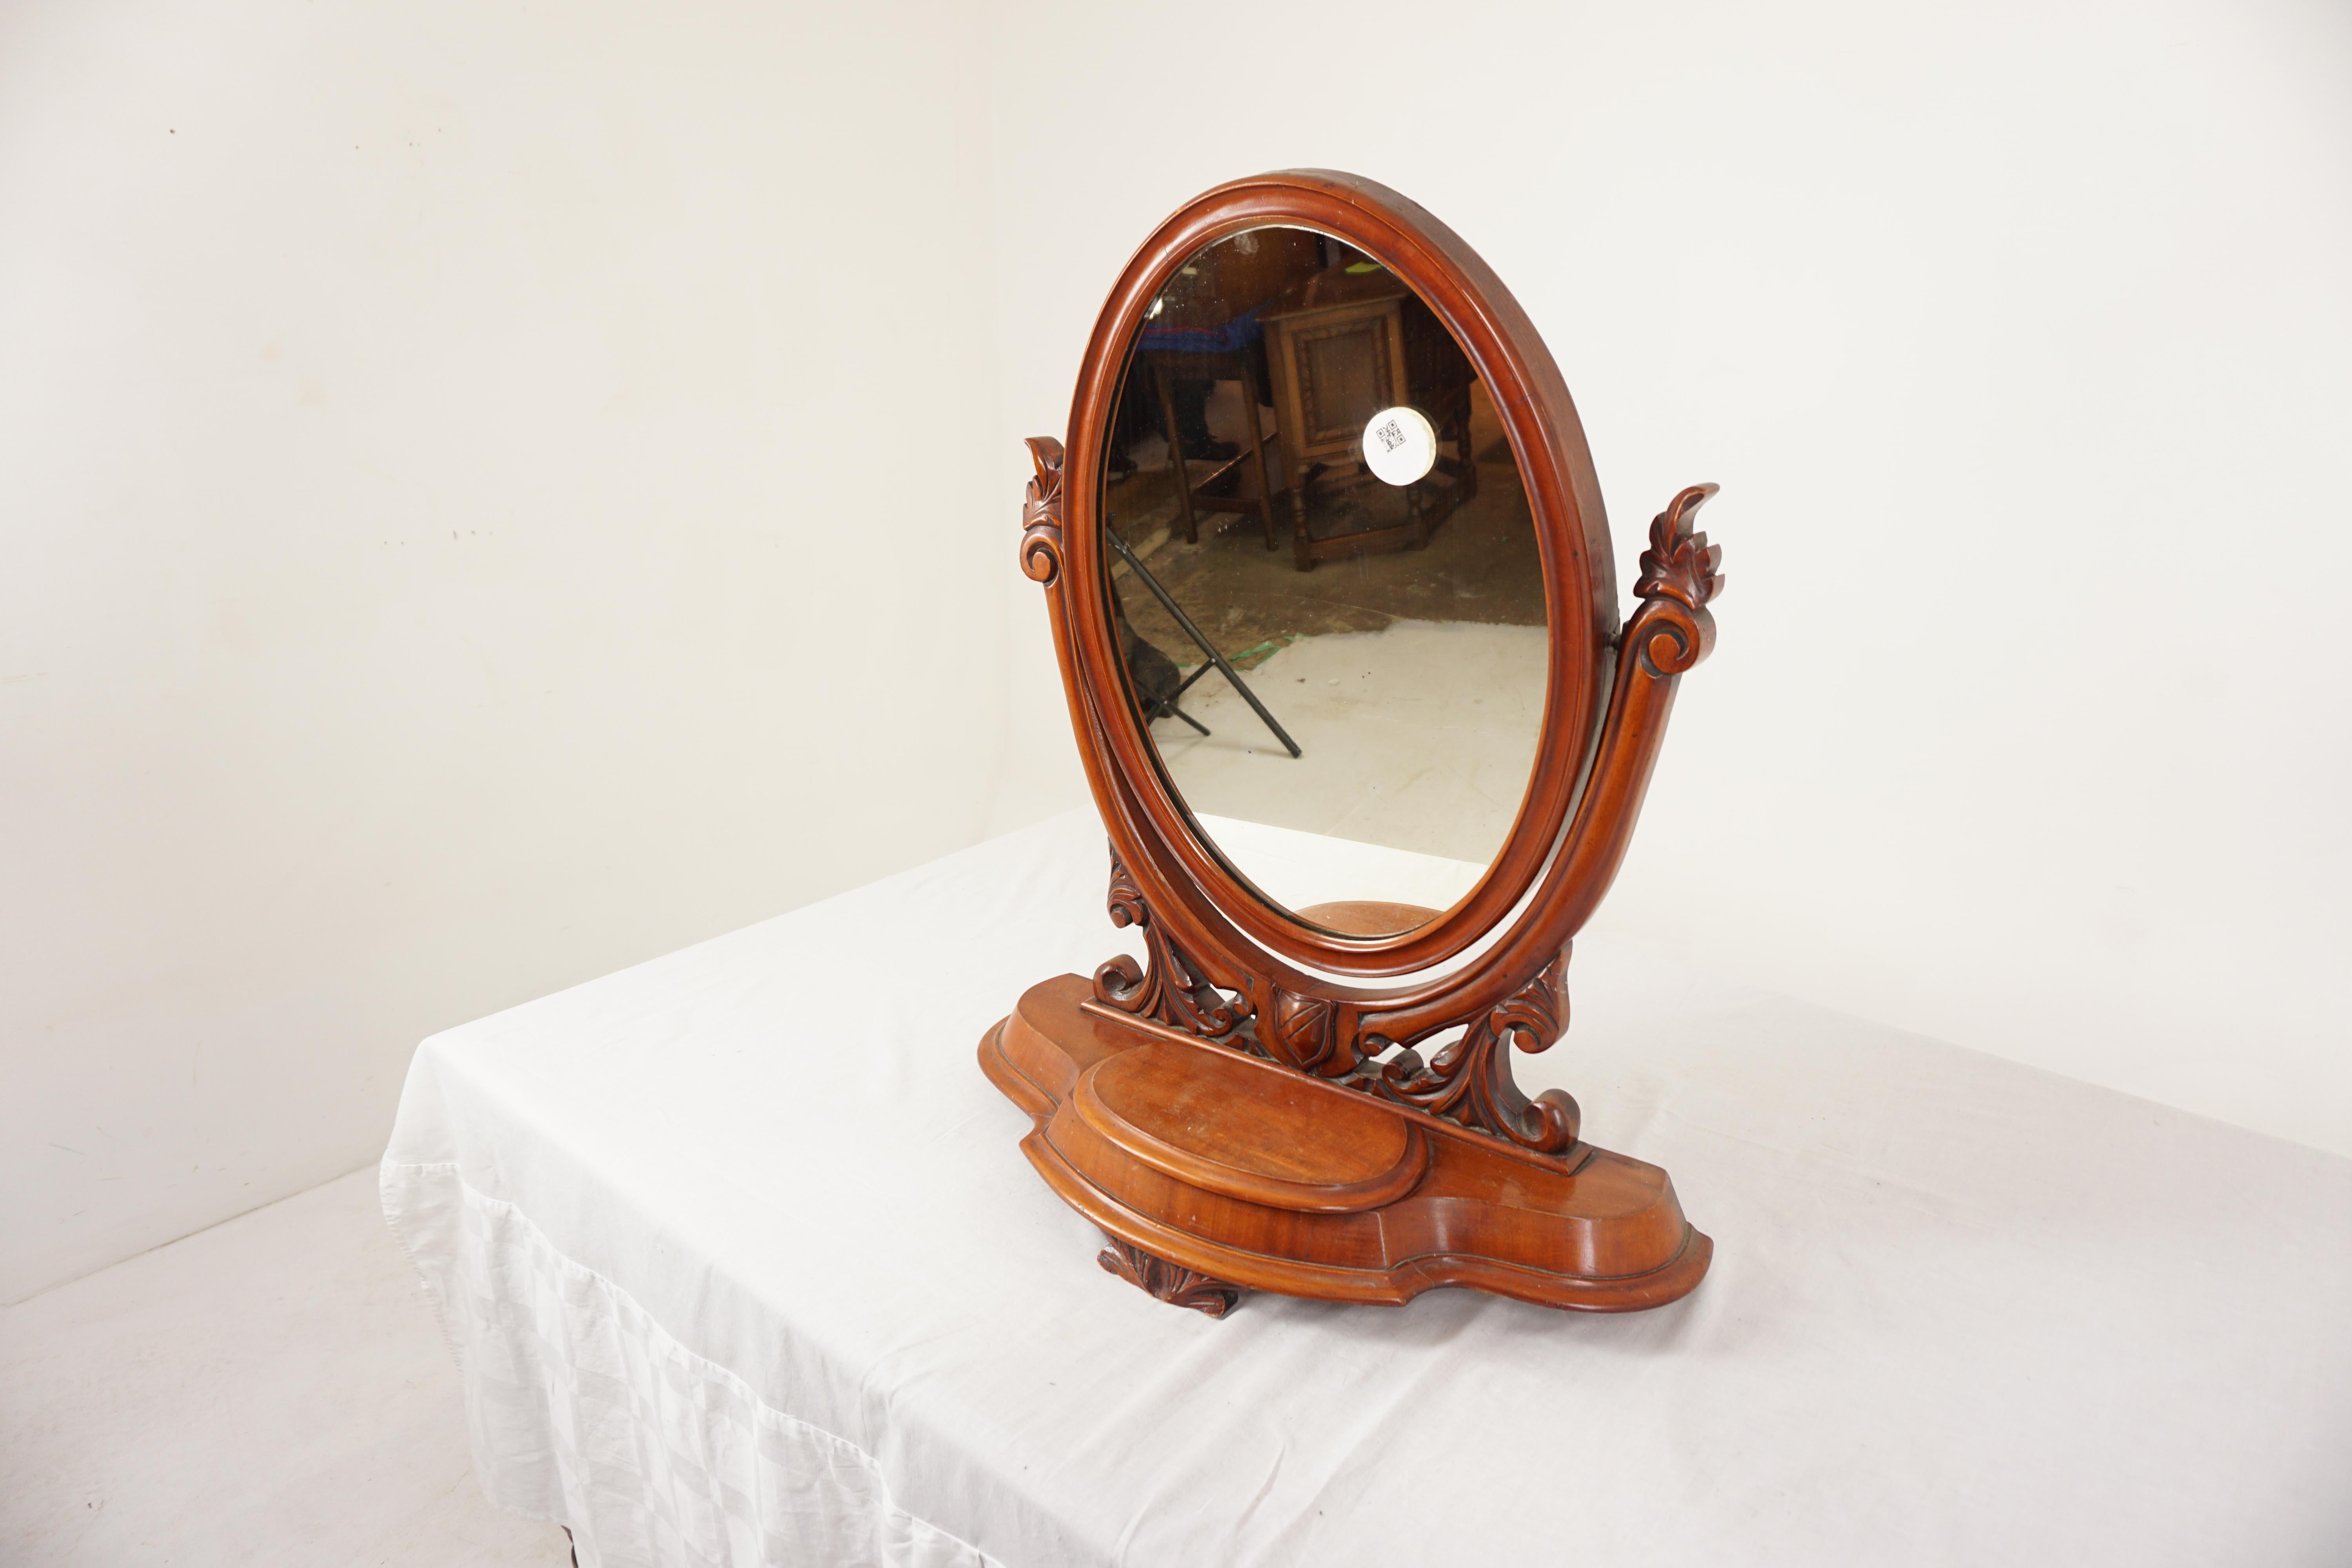 Antique Walnut Mirror, Victorian Walnut Dressing Mirror, Table Mirror, Antique Furniture, Scotland 1880, H1065 

+ Scotland 1880
+ Solid Walnut Veneers 
+ Original Finish
+ Framed oval mirror
+ Suspended on two carved swivel arm supports
+